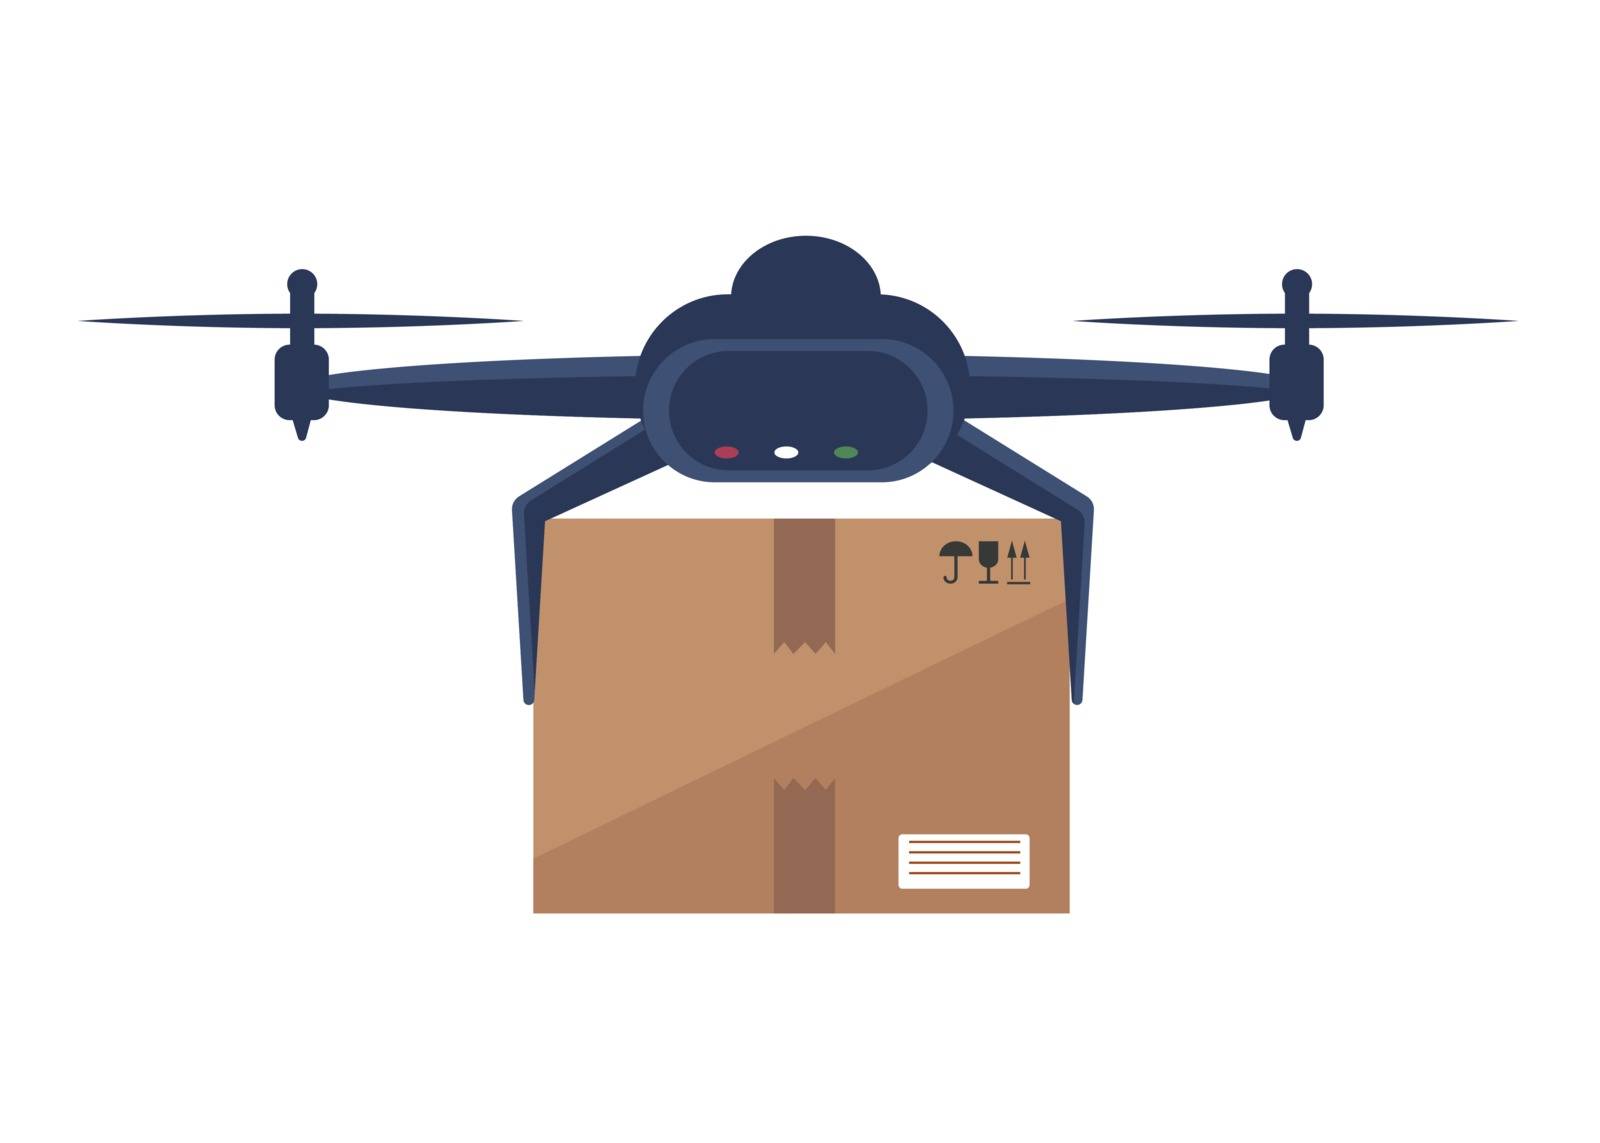 Drone delivers boxes . Non-contact delivery concept. Remote air drone with boxes. Contactless express delivery service. Self-isolation lifestyle. Contactless delivery during quarantine by Helenshi